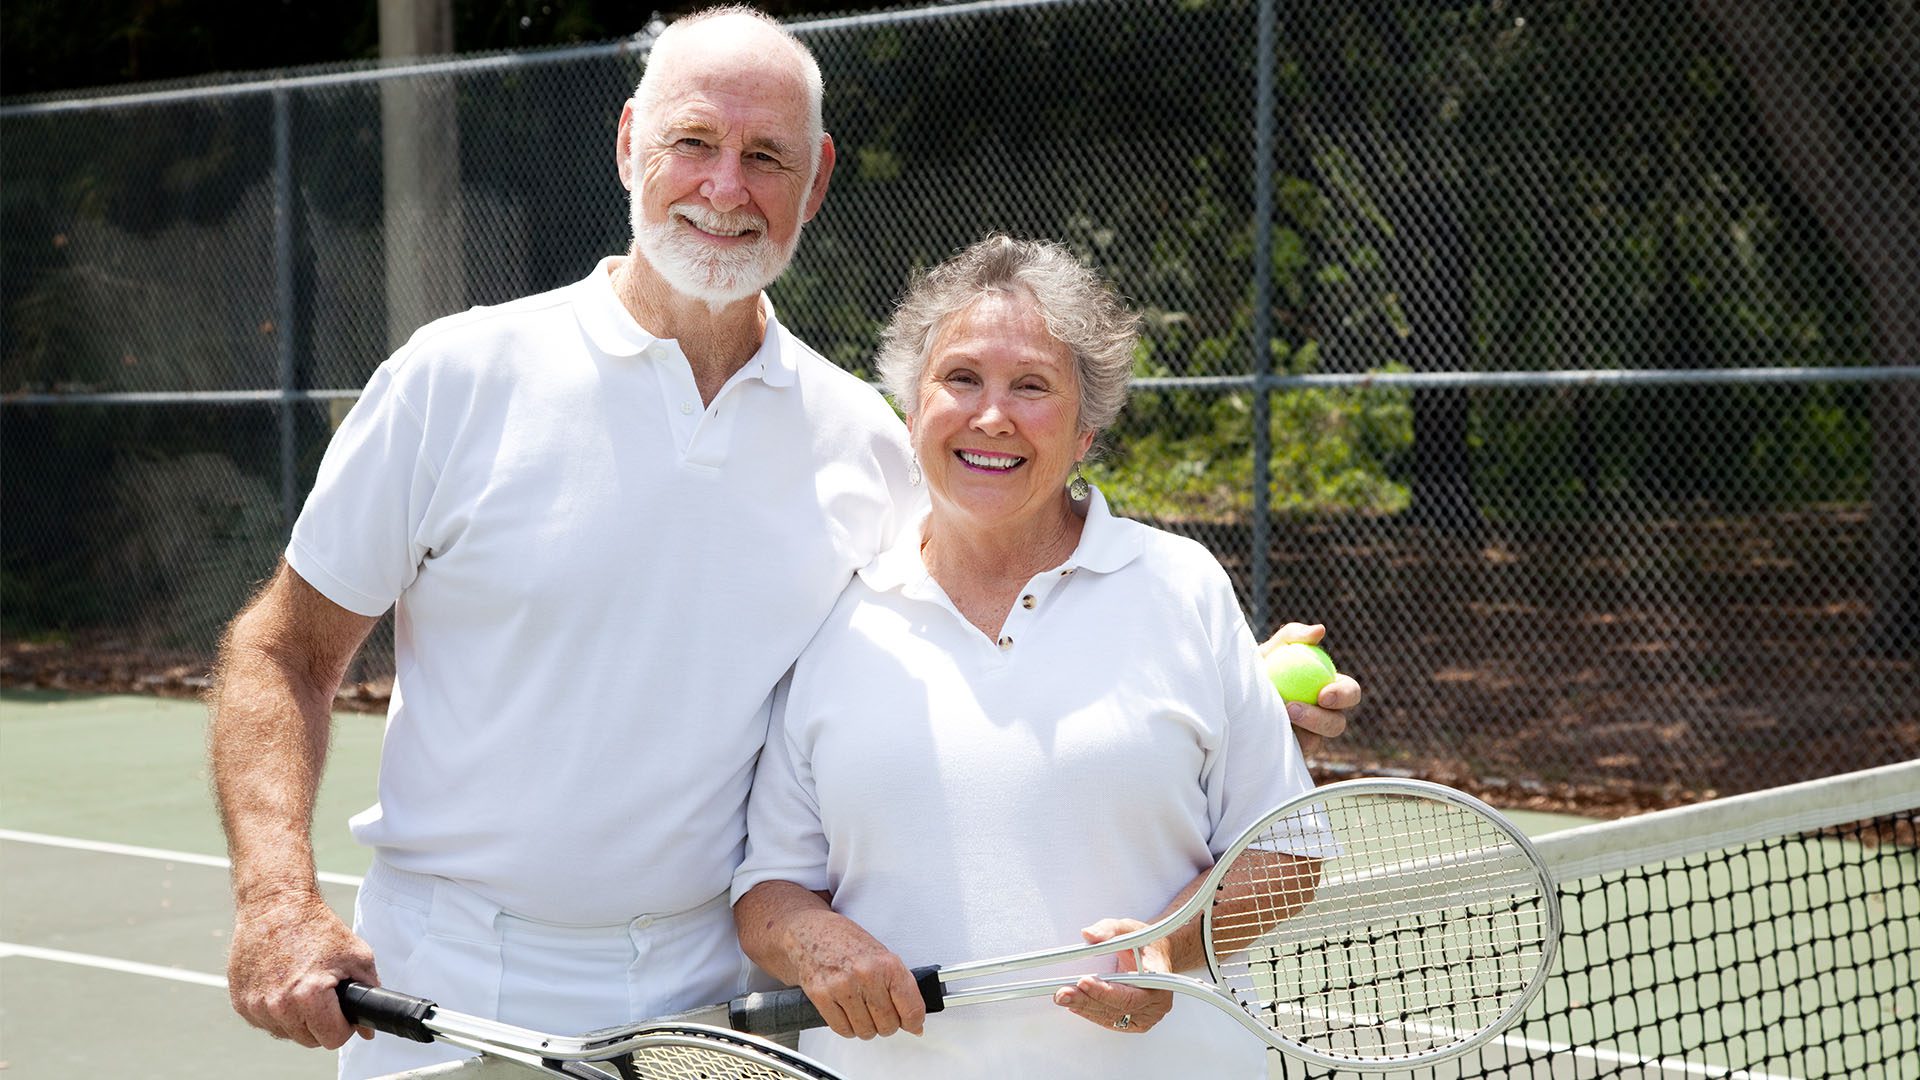 Male and Female senior tennis players next to net